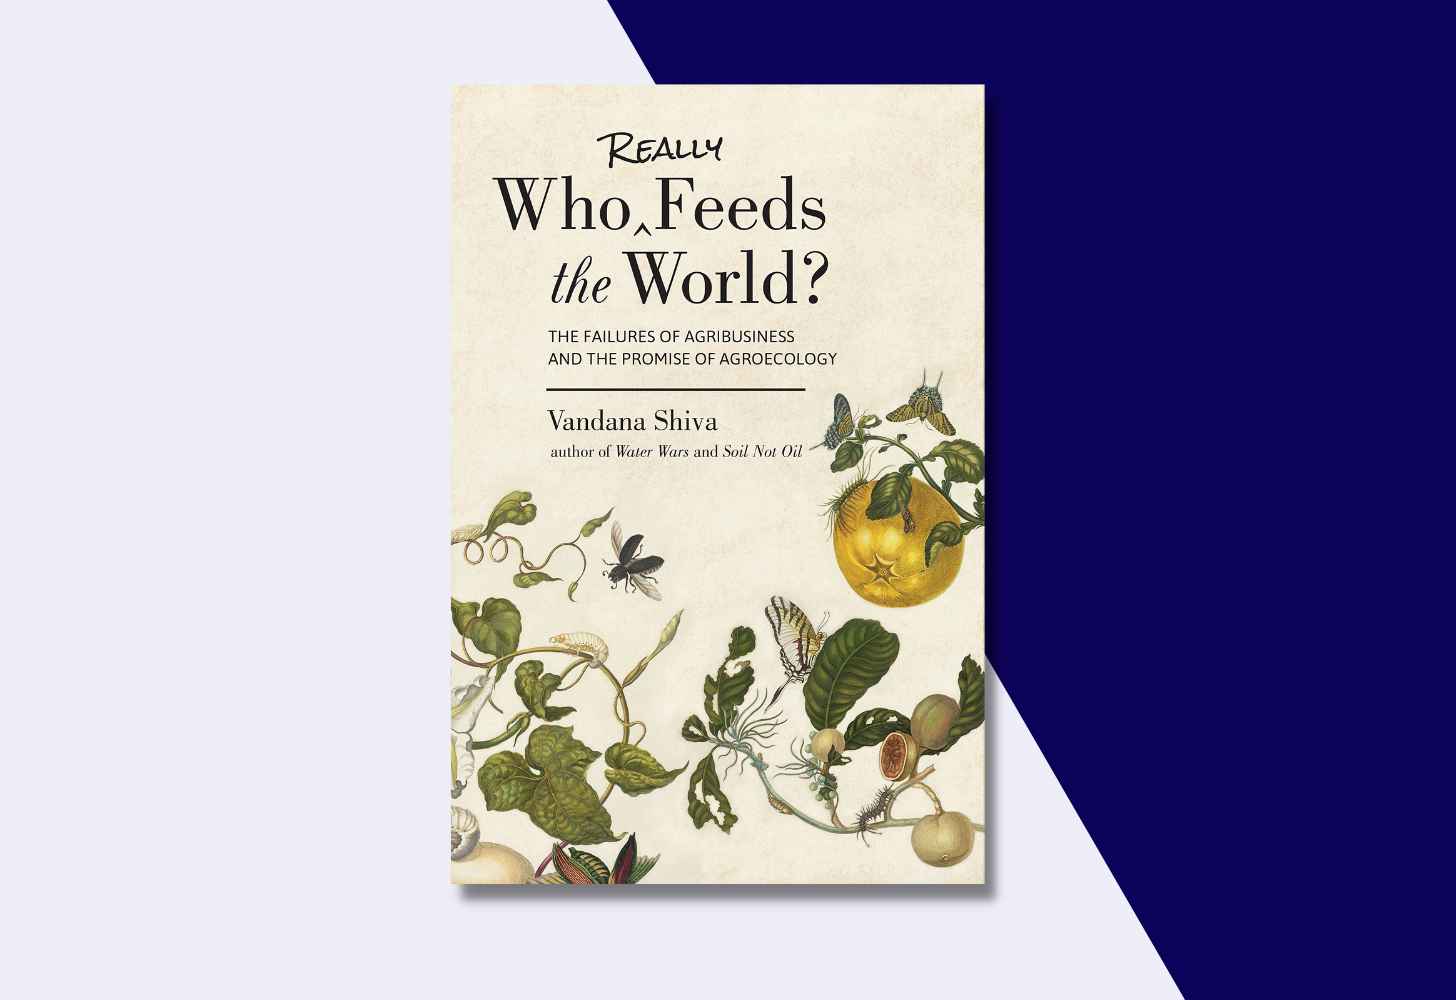 The Cover Of “Who Really Feeds the World?: The Failures of Agribusiness and the Promise of Agroecology” by Vandana Shiva